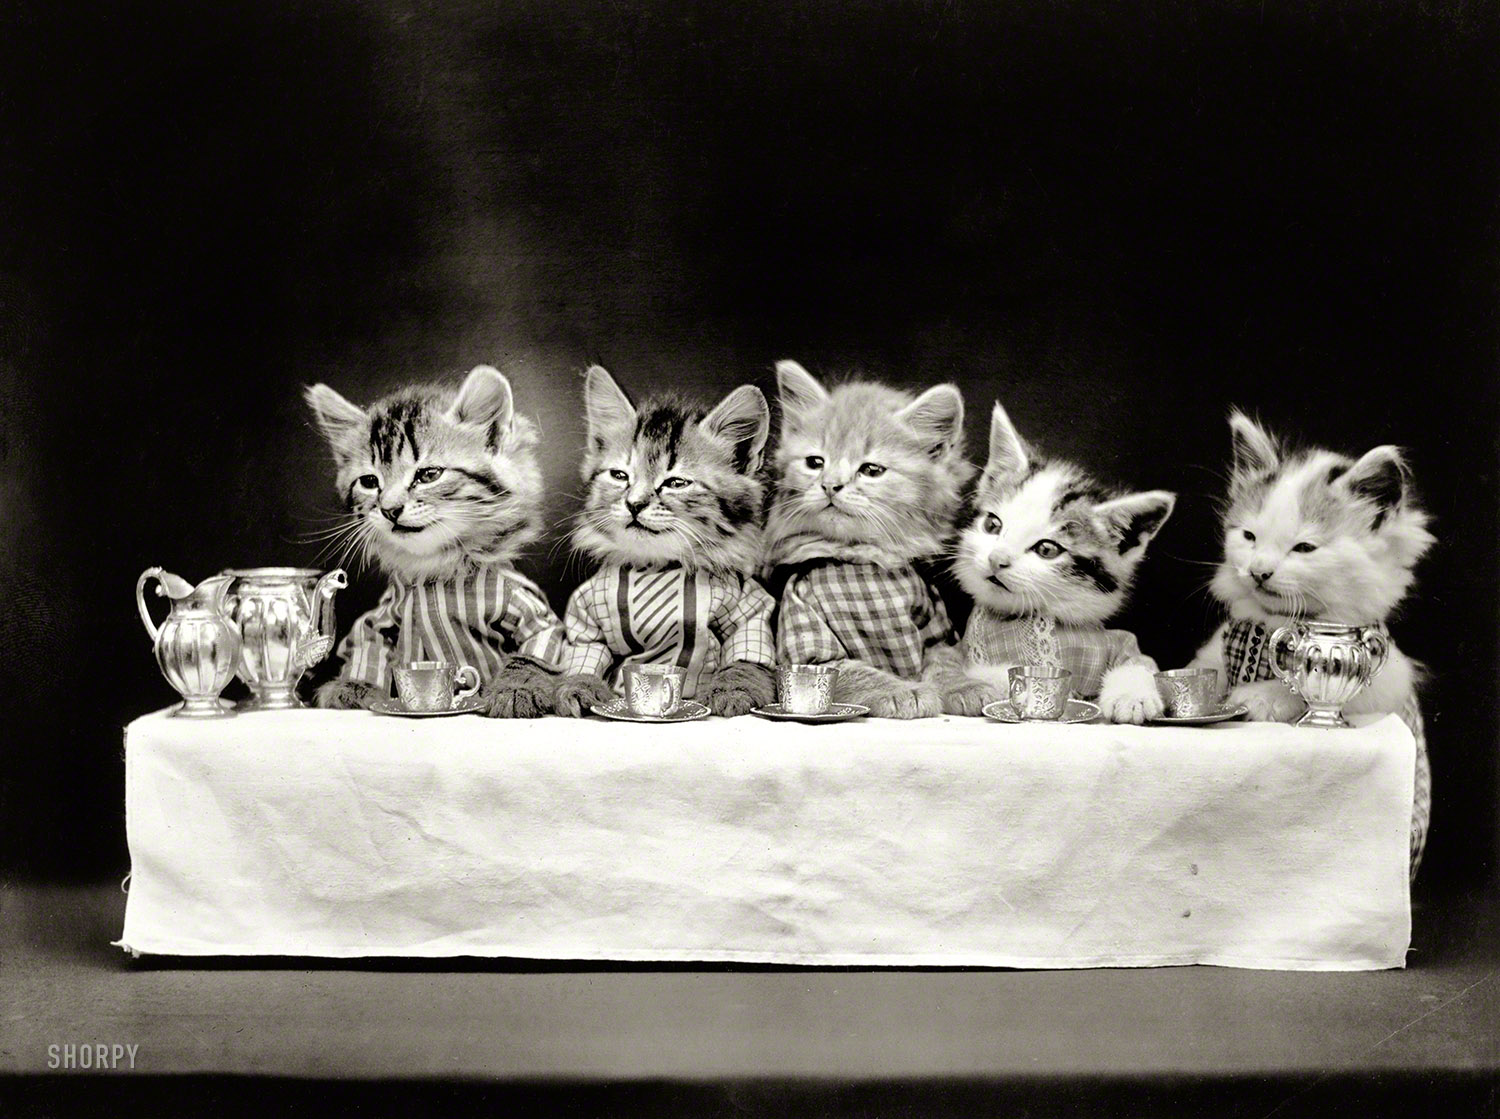 1914. "Kittens in costume at banquet table with tea service." Conclave of the Congressional Catnip Caucus. Photo by Harry W. Frees. View full size.